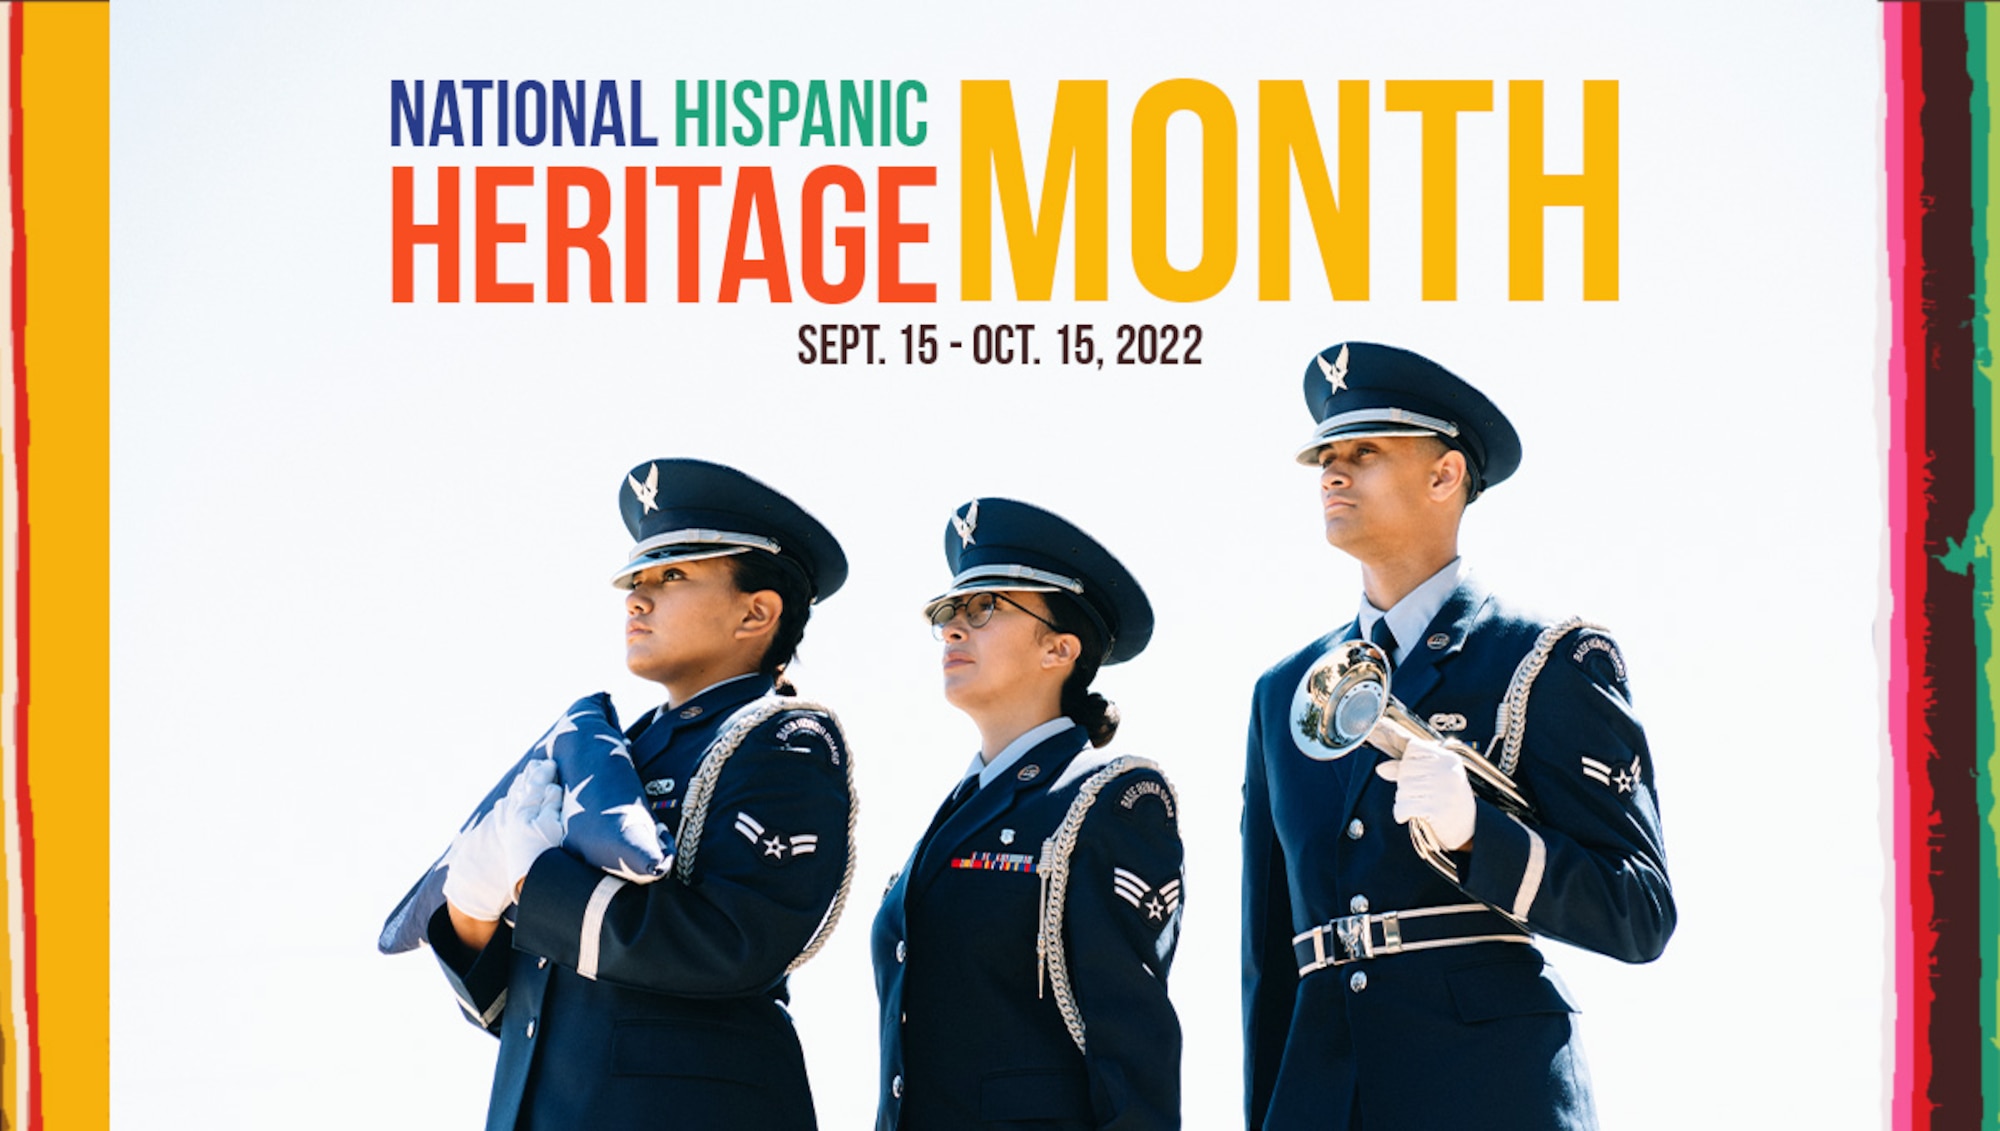 National Hispanic Heritage Month observance graphic